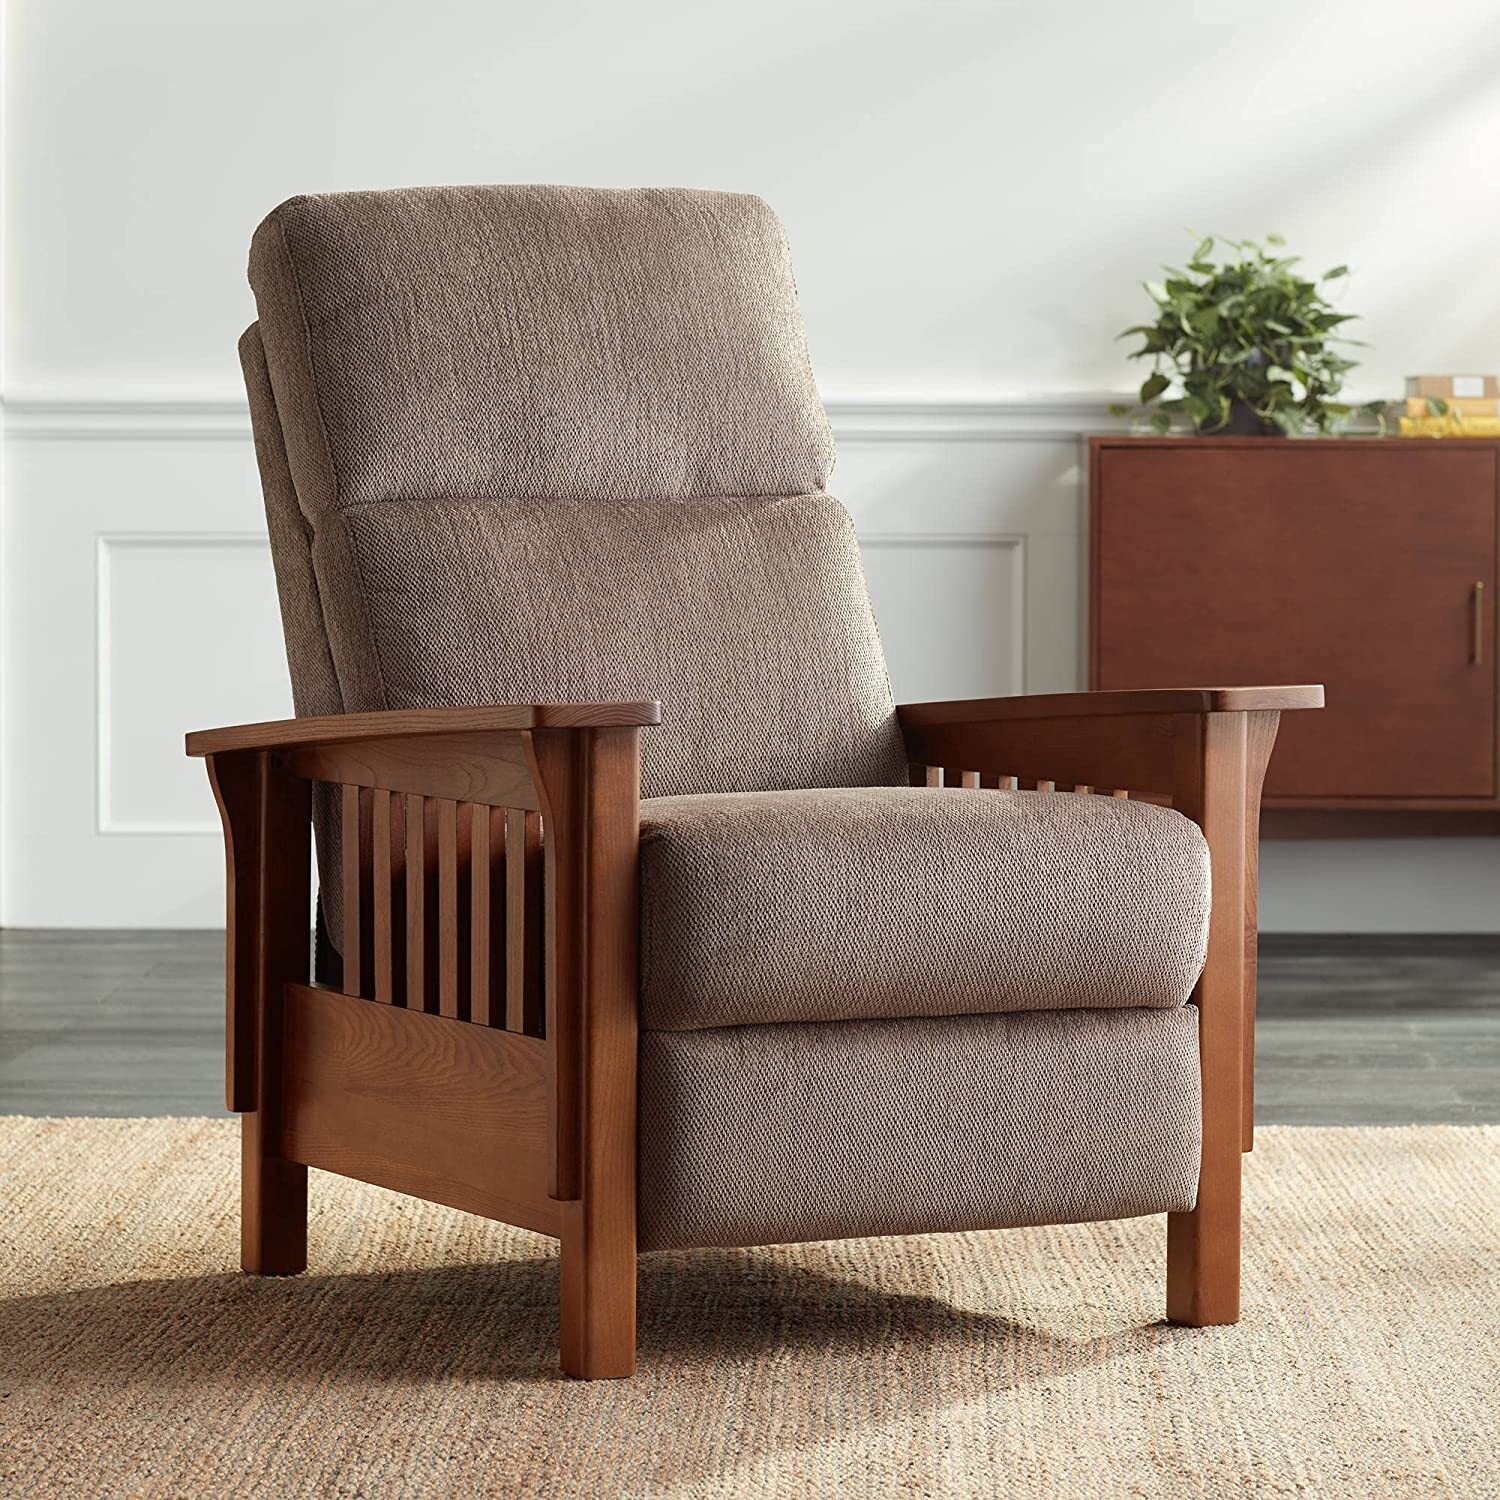 Chic Mission Style Recliner Chair